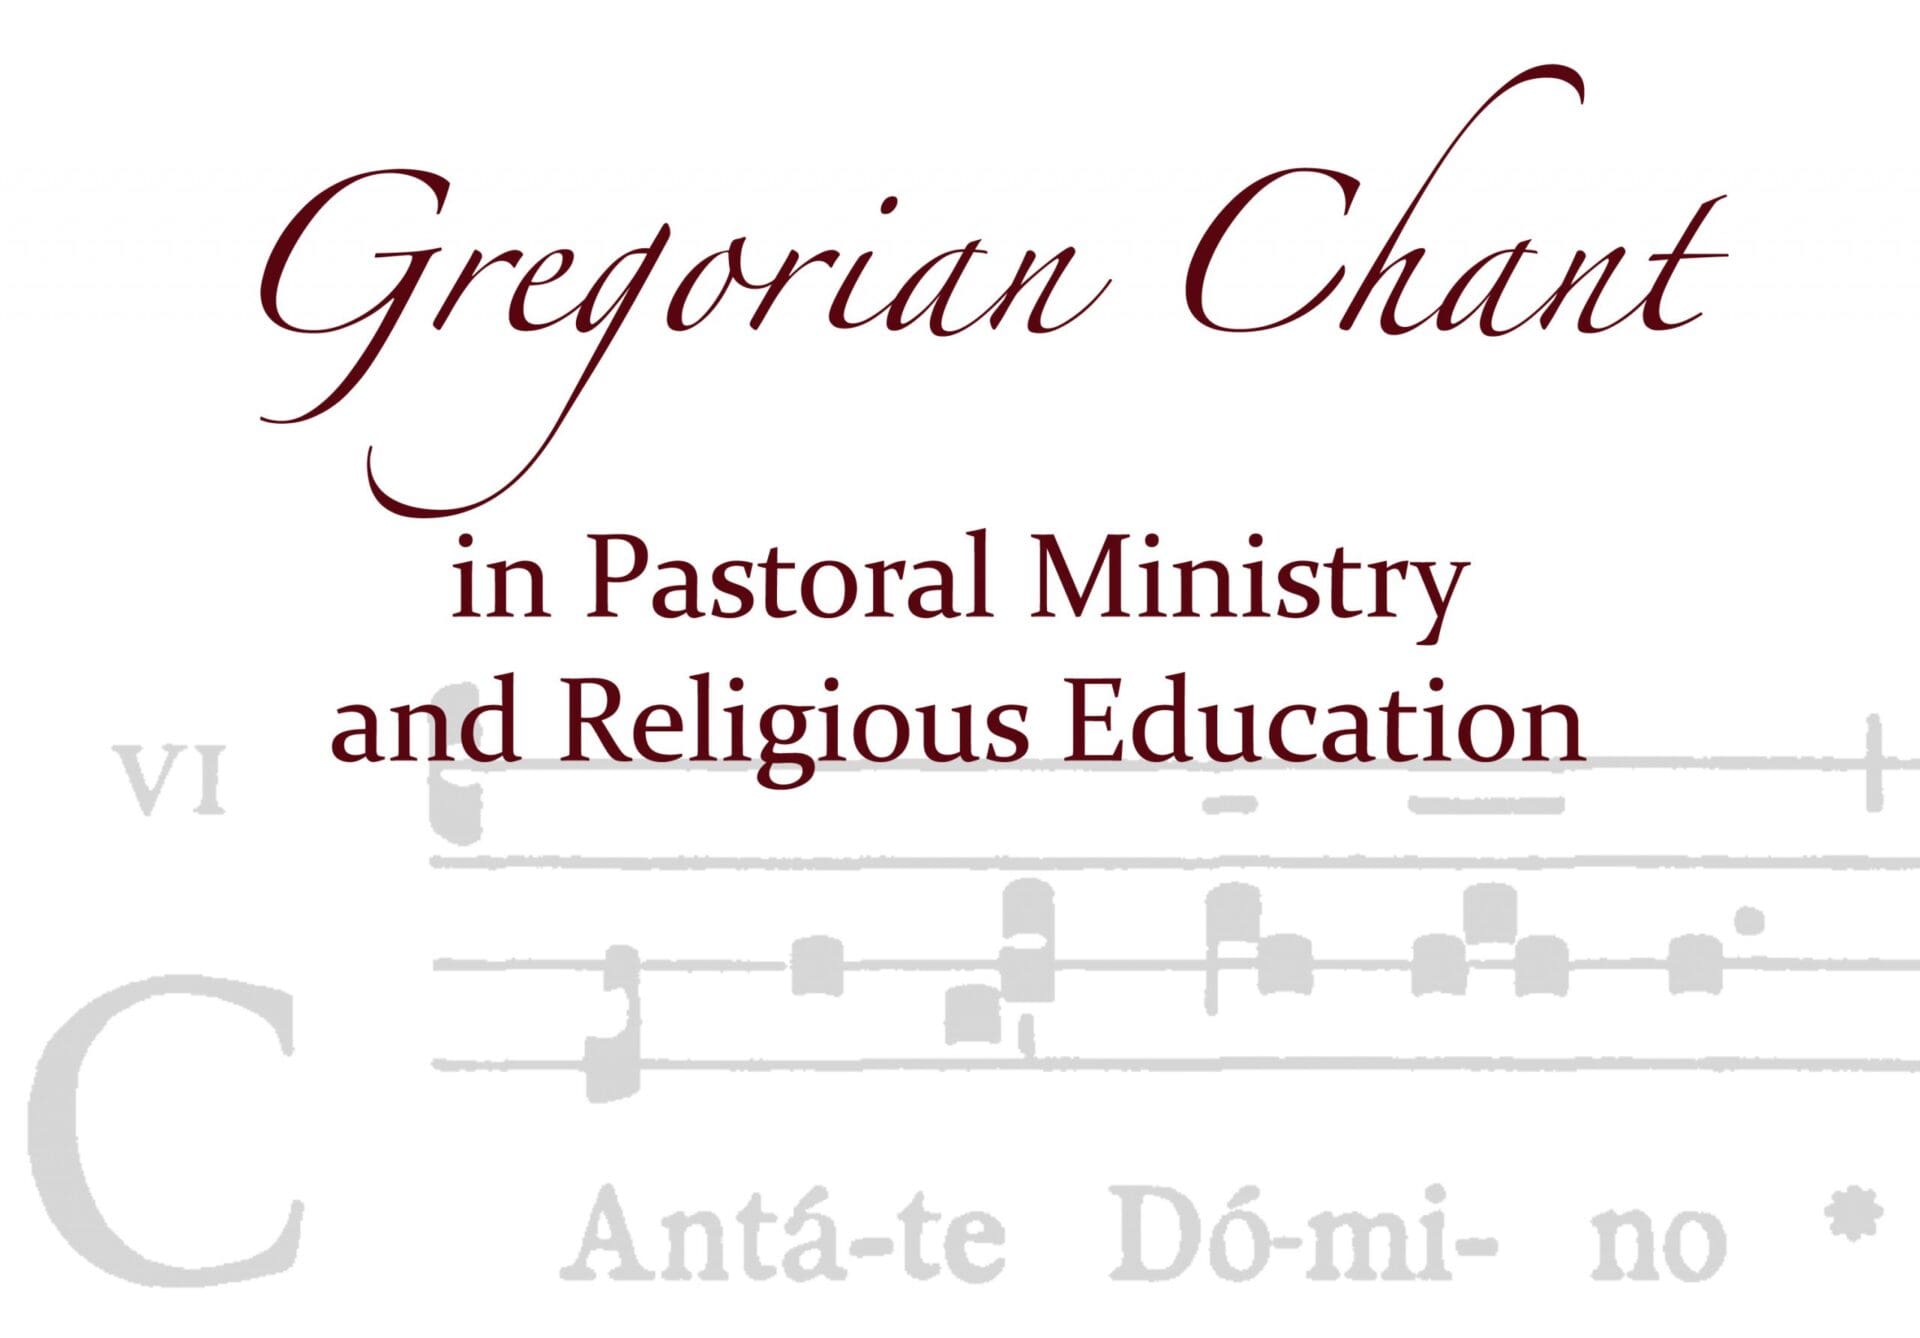 National Conference: “Gregorian Chant in Pastoral Ministry and Religious Education”